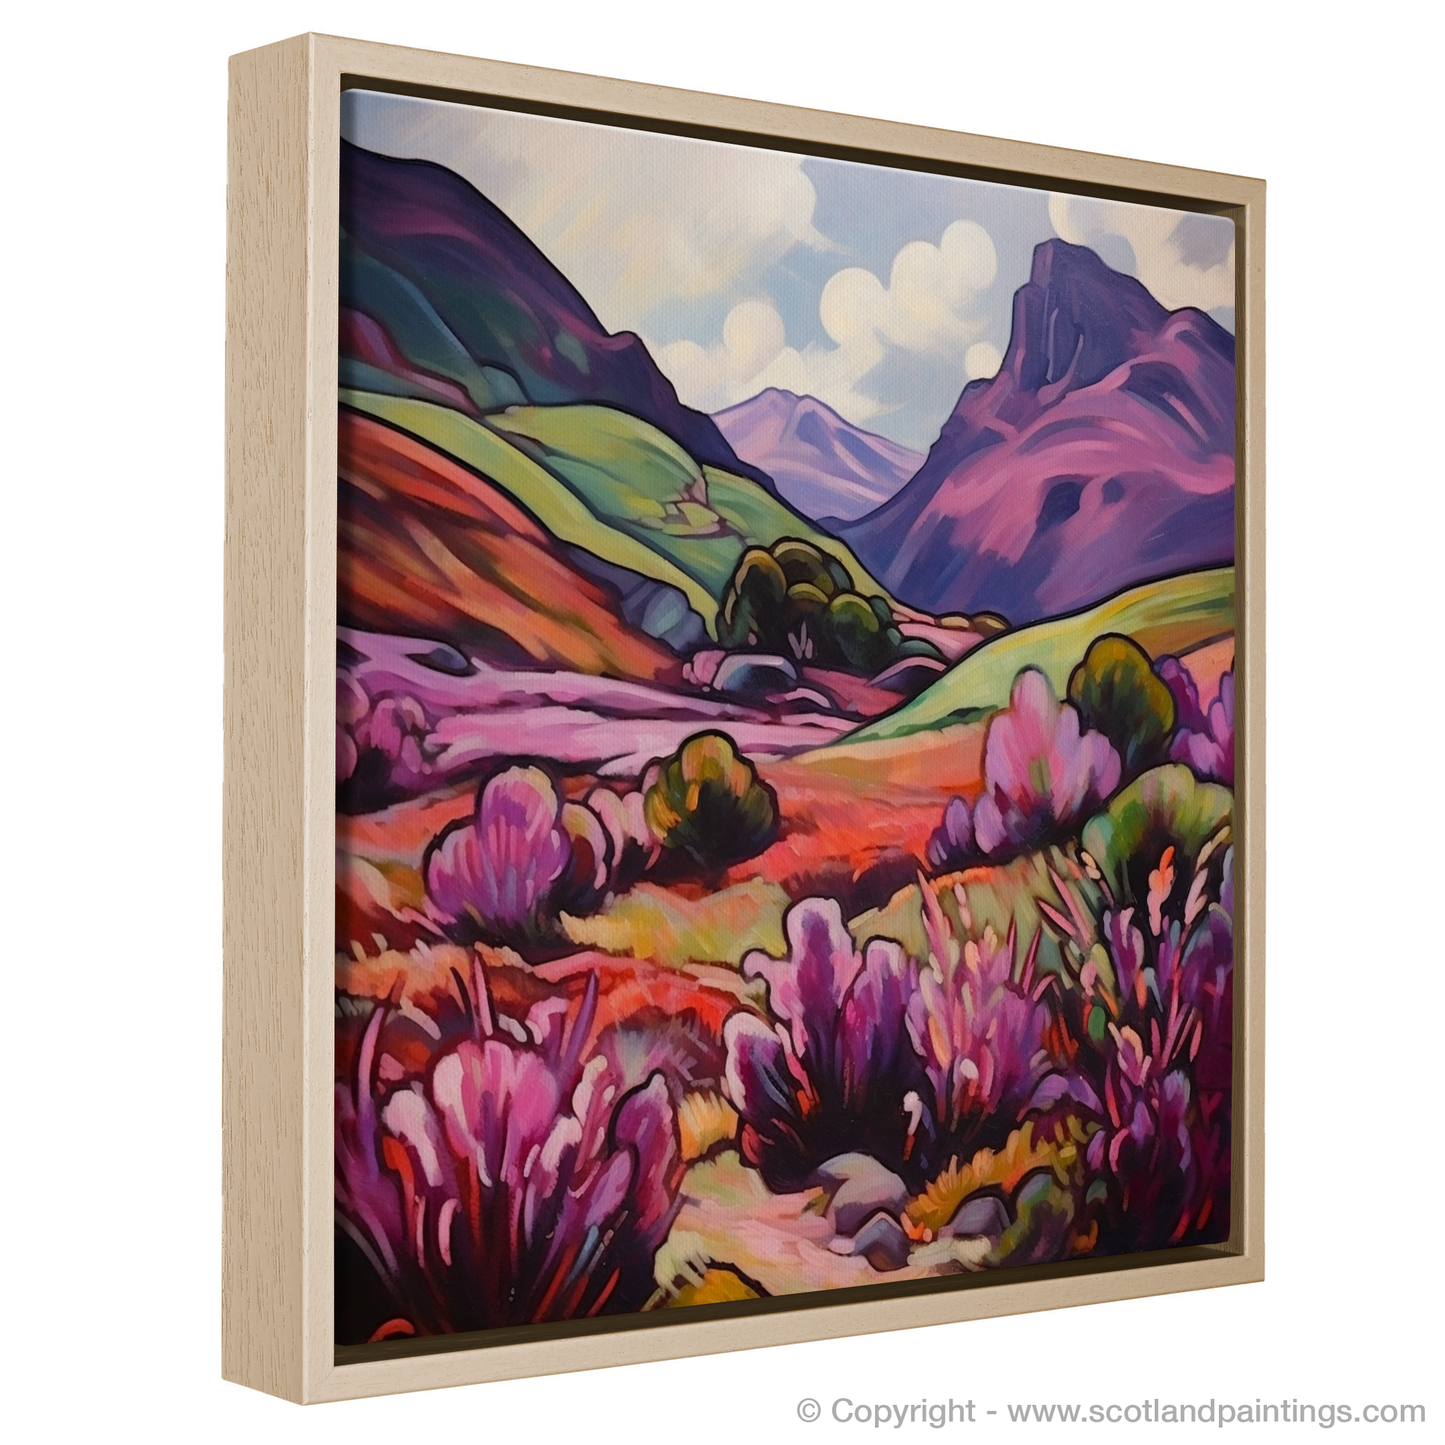 Cubist Heather in Glencoe - A Highland Tapestry